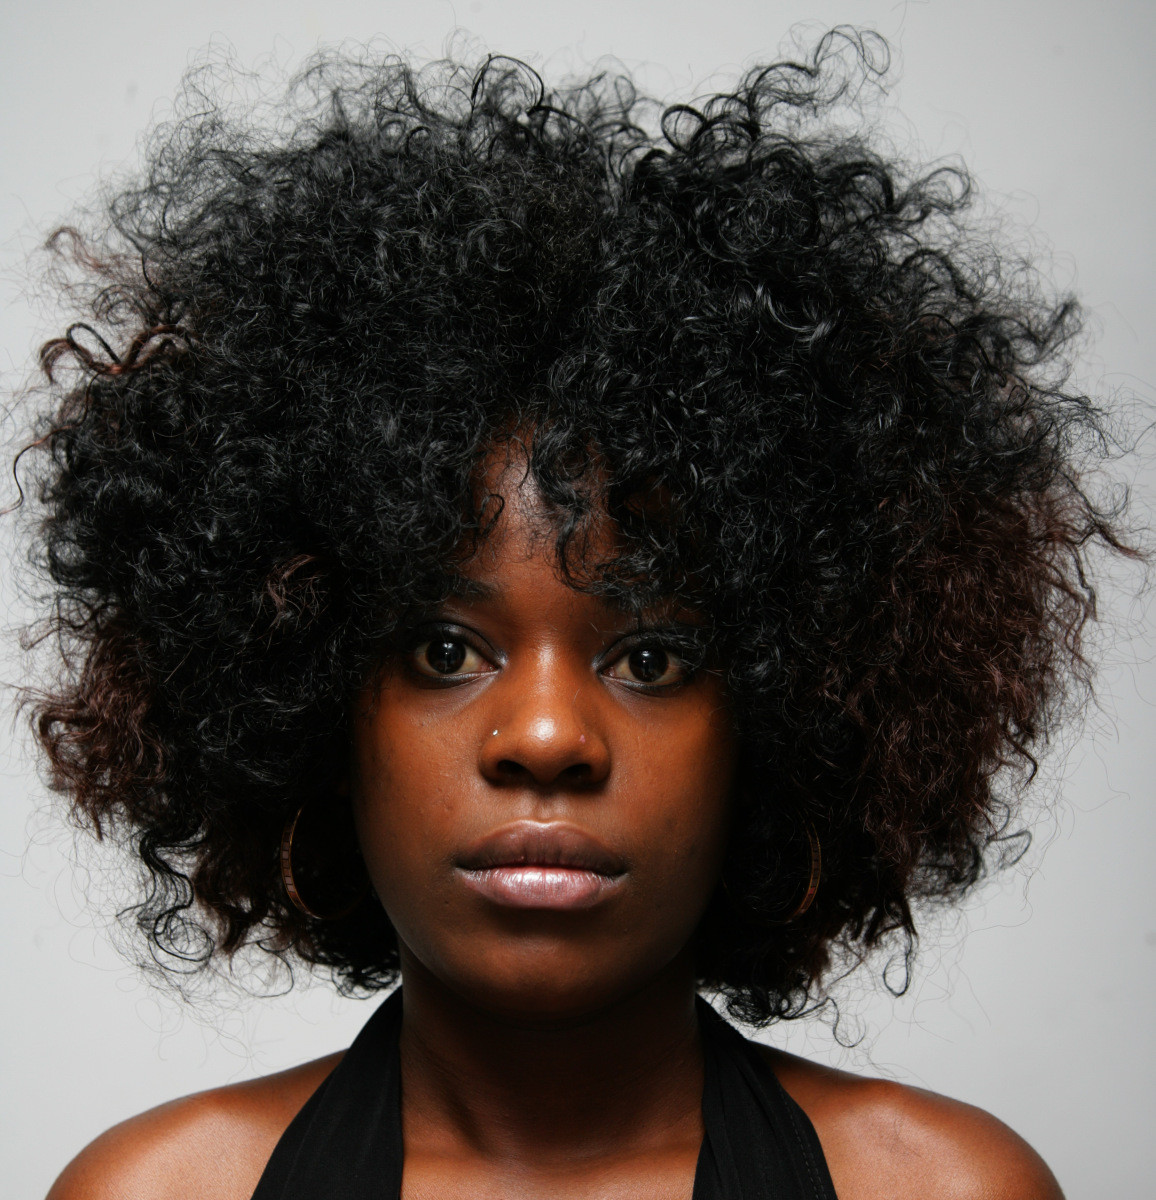 Afro Haircuts For Women
 The Strong Black Woman How Stereotypes Can Affect Our